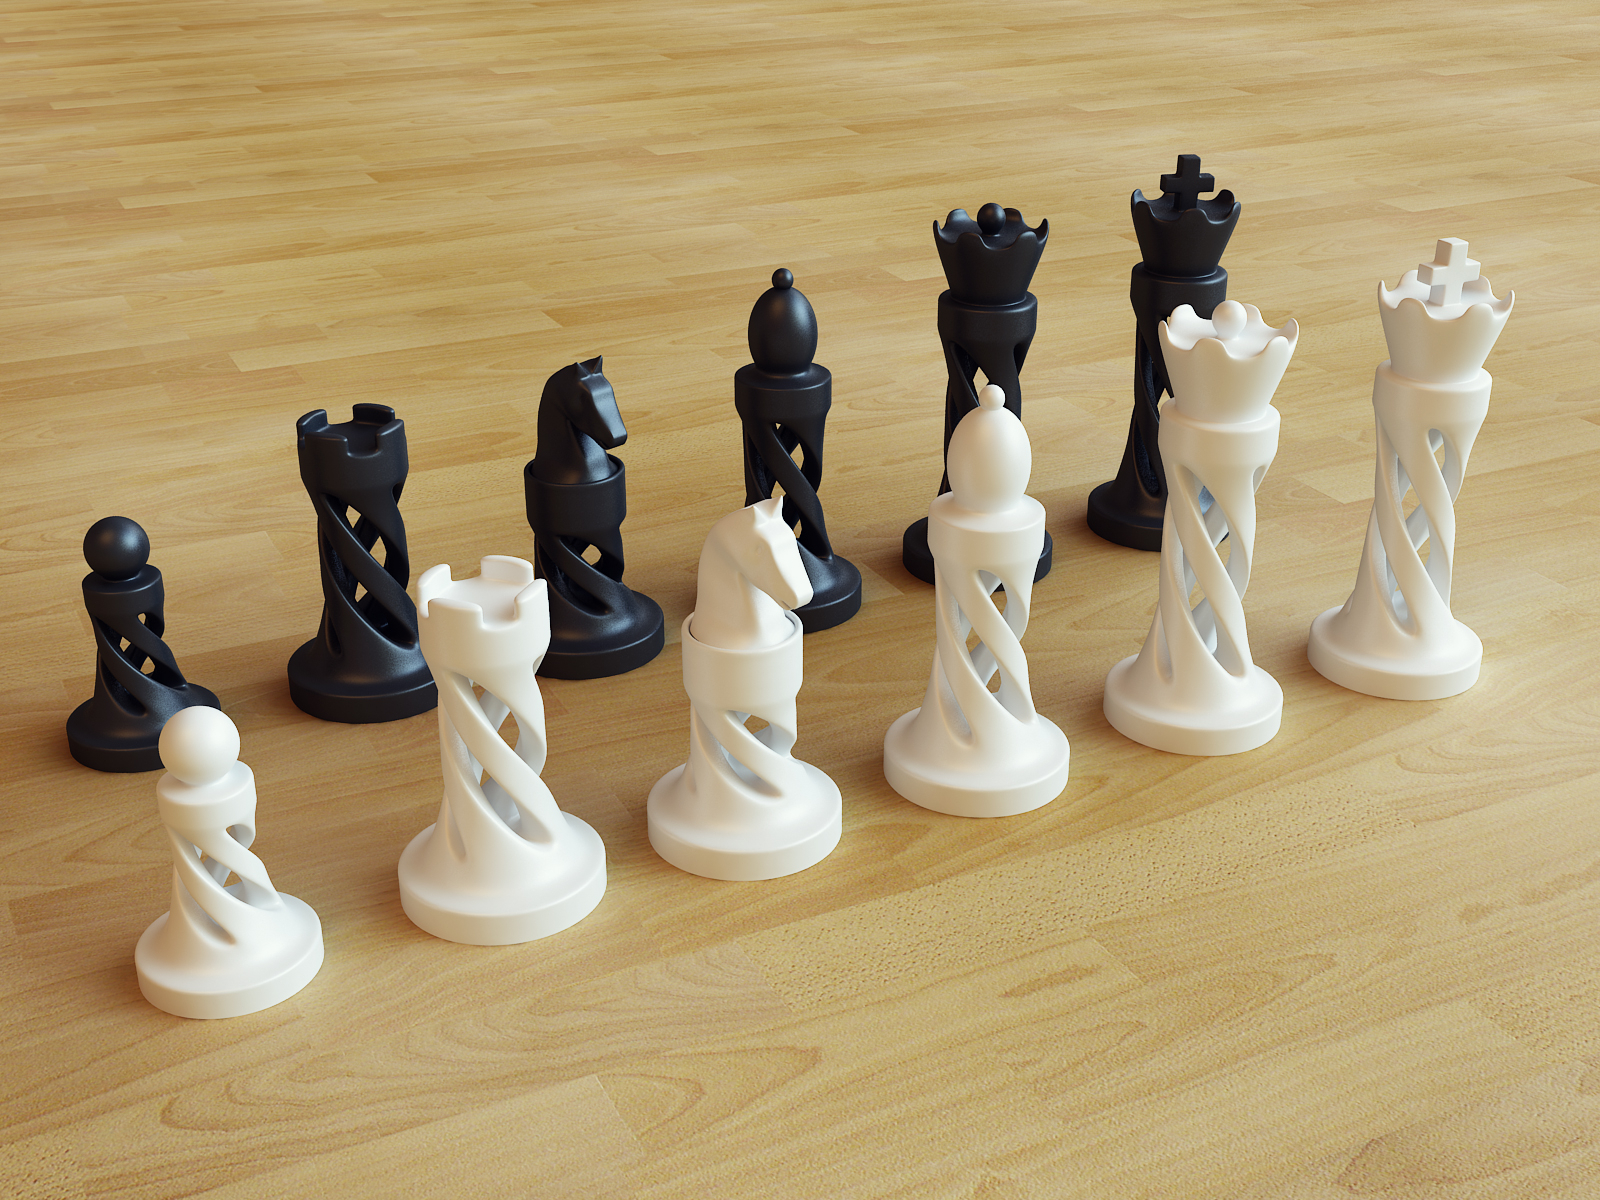 3D Printable Chess Pieces